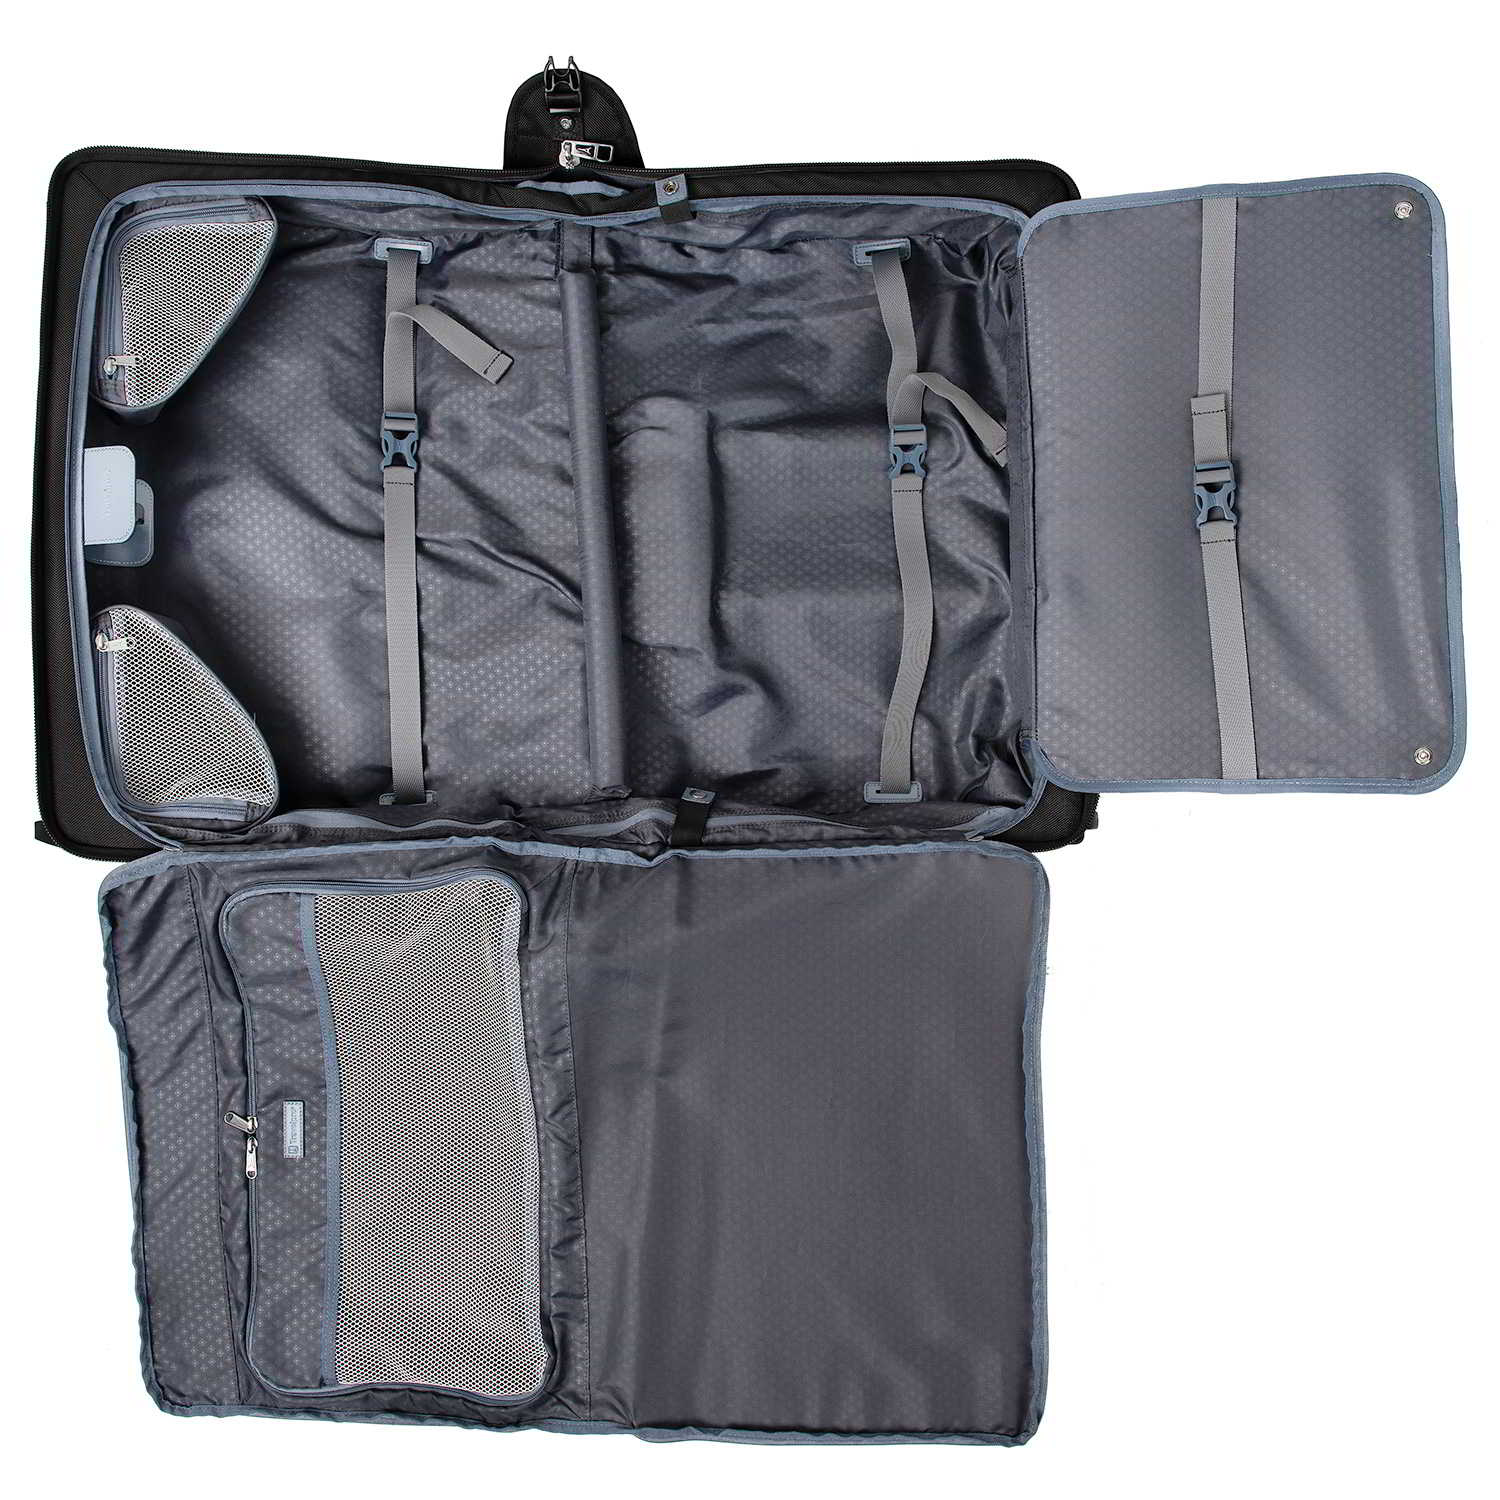 Luggage  Luggage bags travel, Black duffle bag, Suit carrier